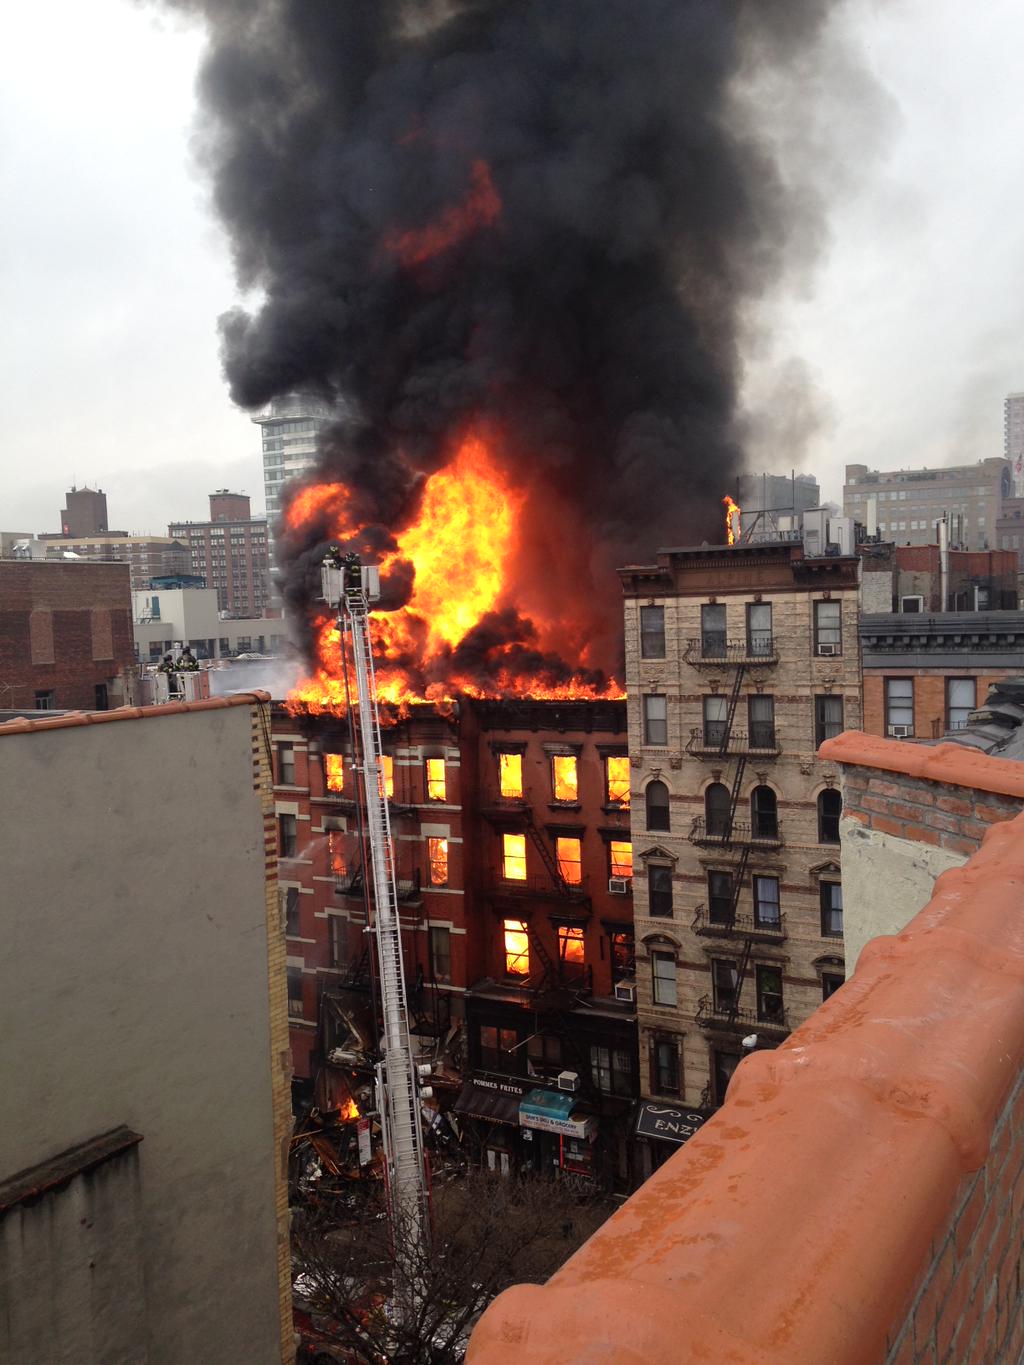 An explosion rocked 121 Second Ave. on Thursday afternoon, sparking a raging fire. In the end, 12 people were left injured and one-and-a-half buildings had collapsed. Photo via Twitter / @liberation nyc